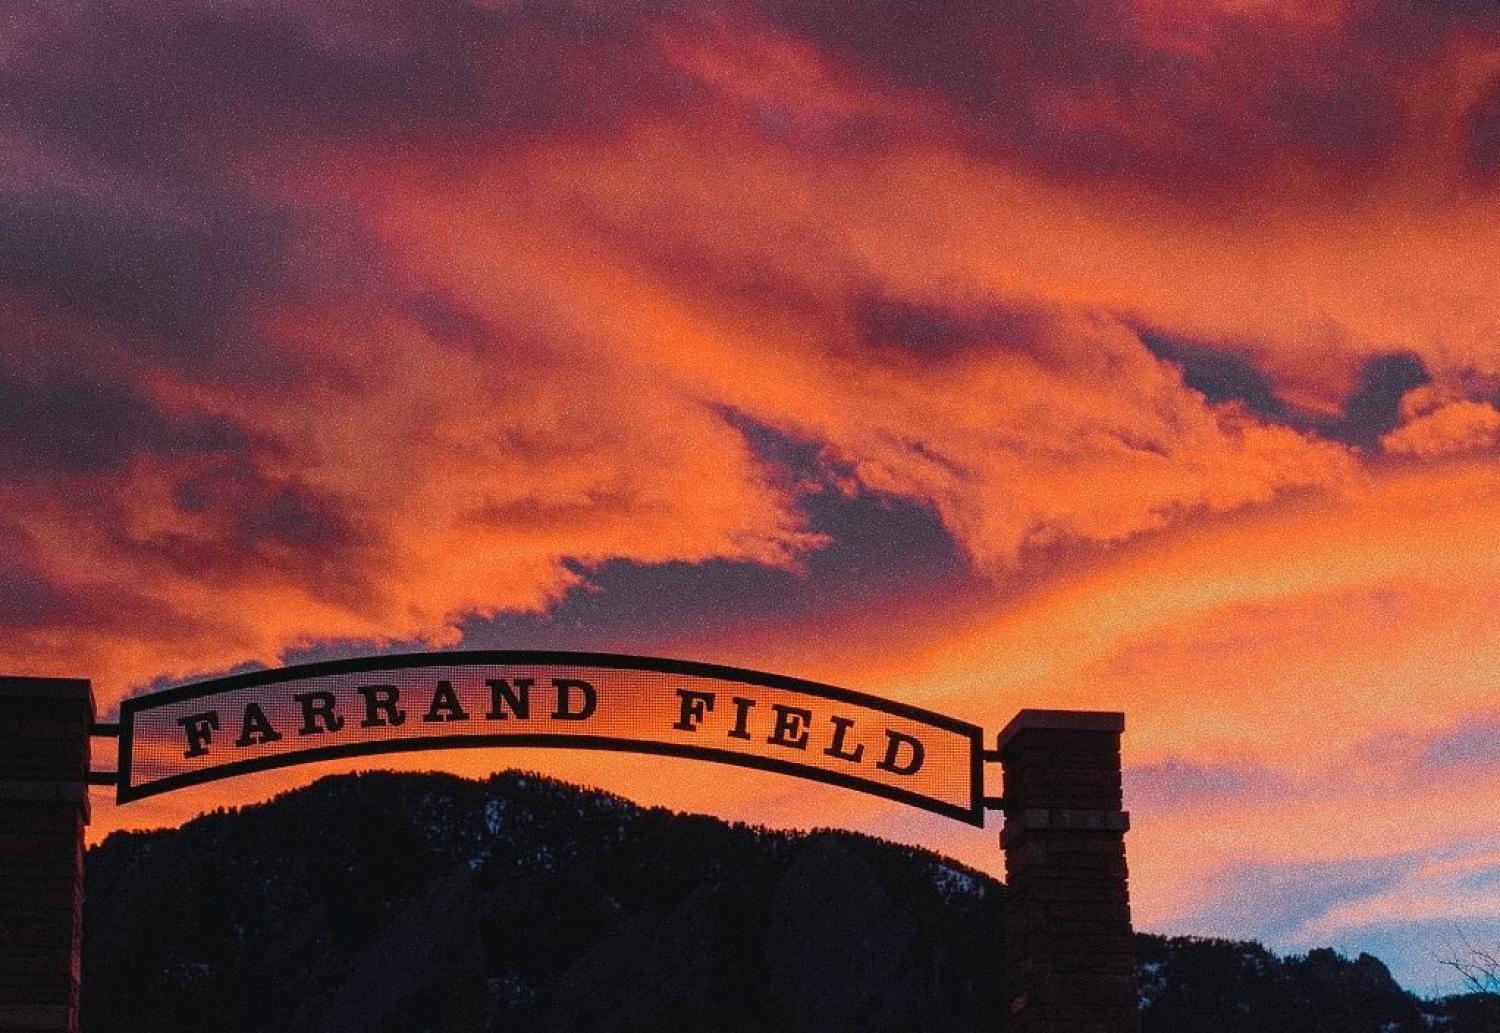 The sun sets over the arch of the entryway into Farrand Field.